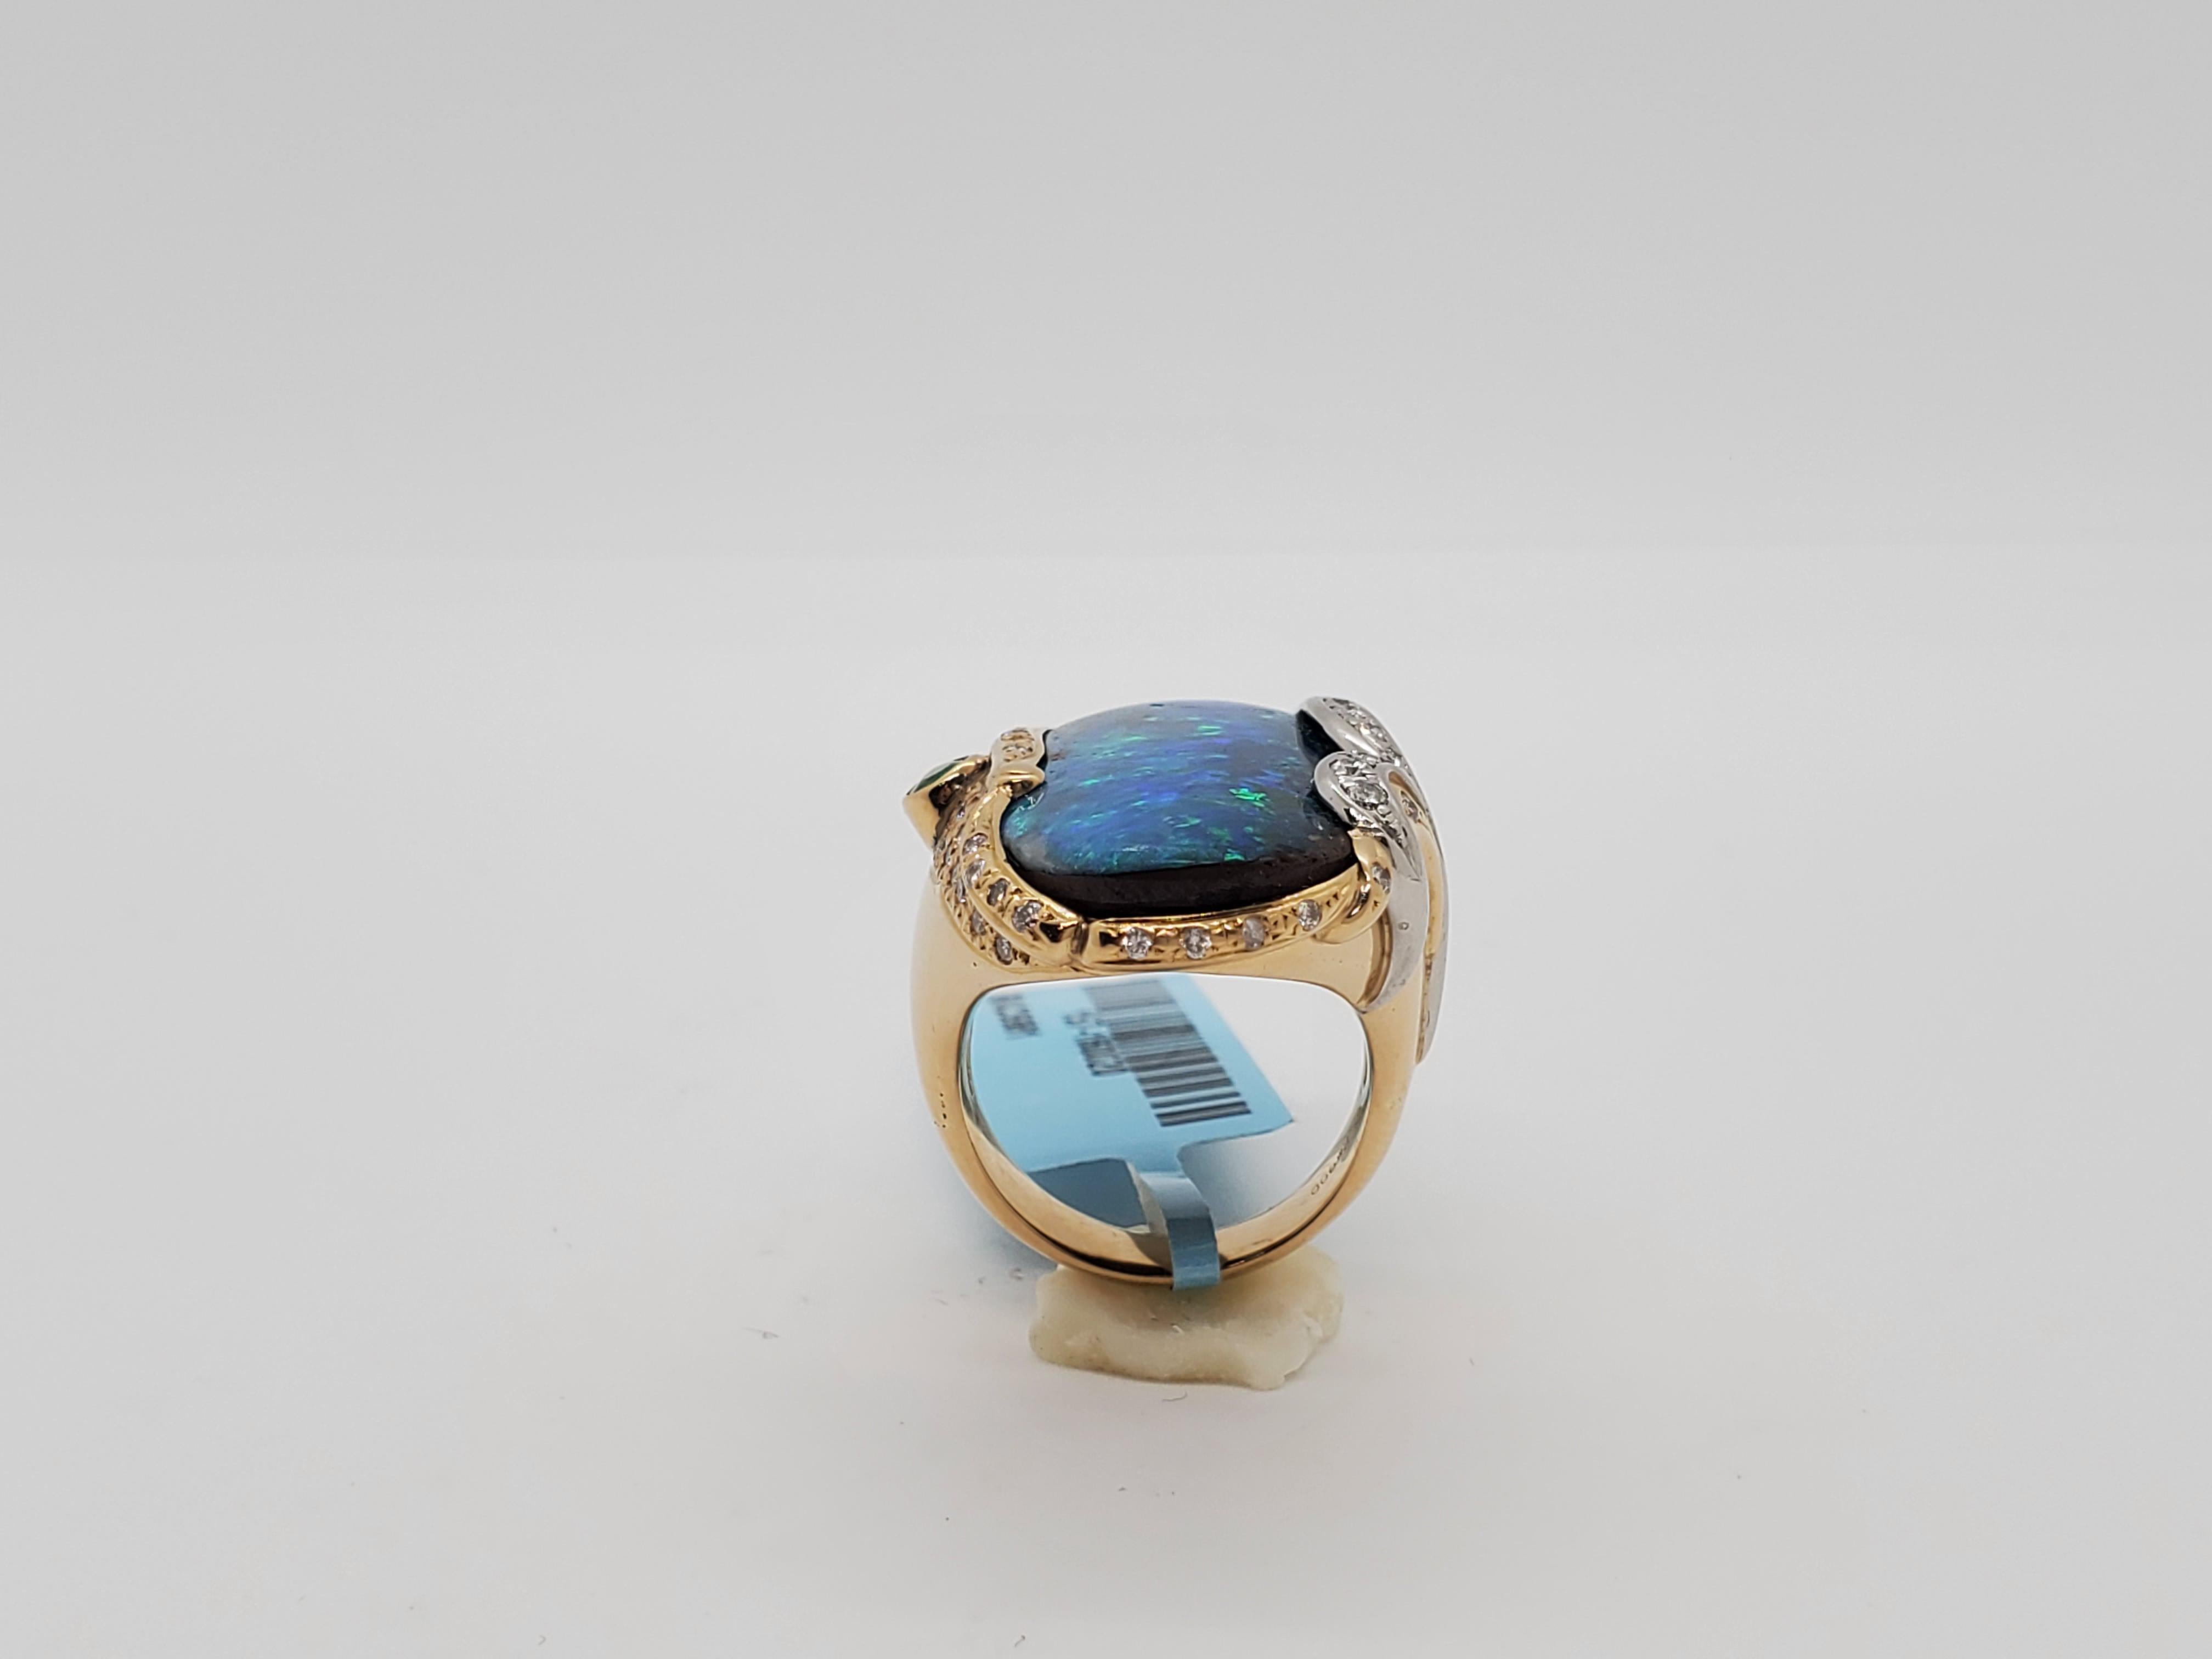 Boulder Opal Cabochon, Emerald, and White Diamond Ring in 18 Karat Gold 3